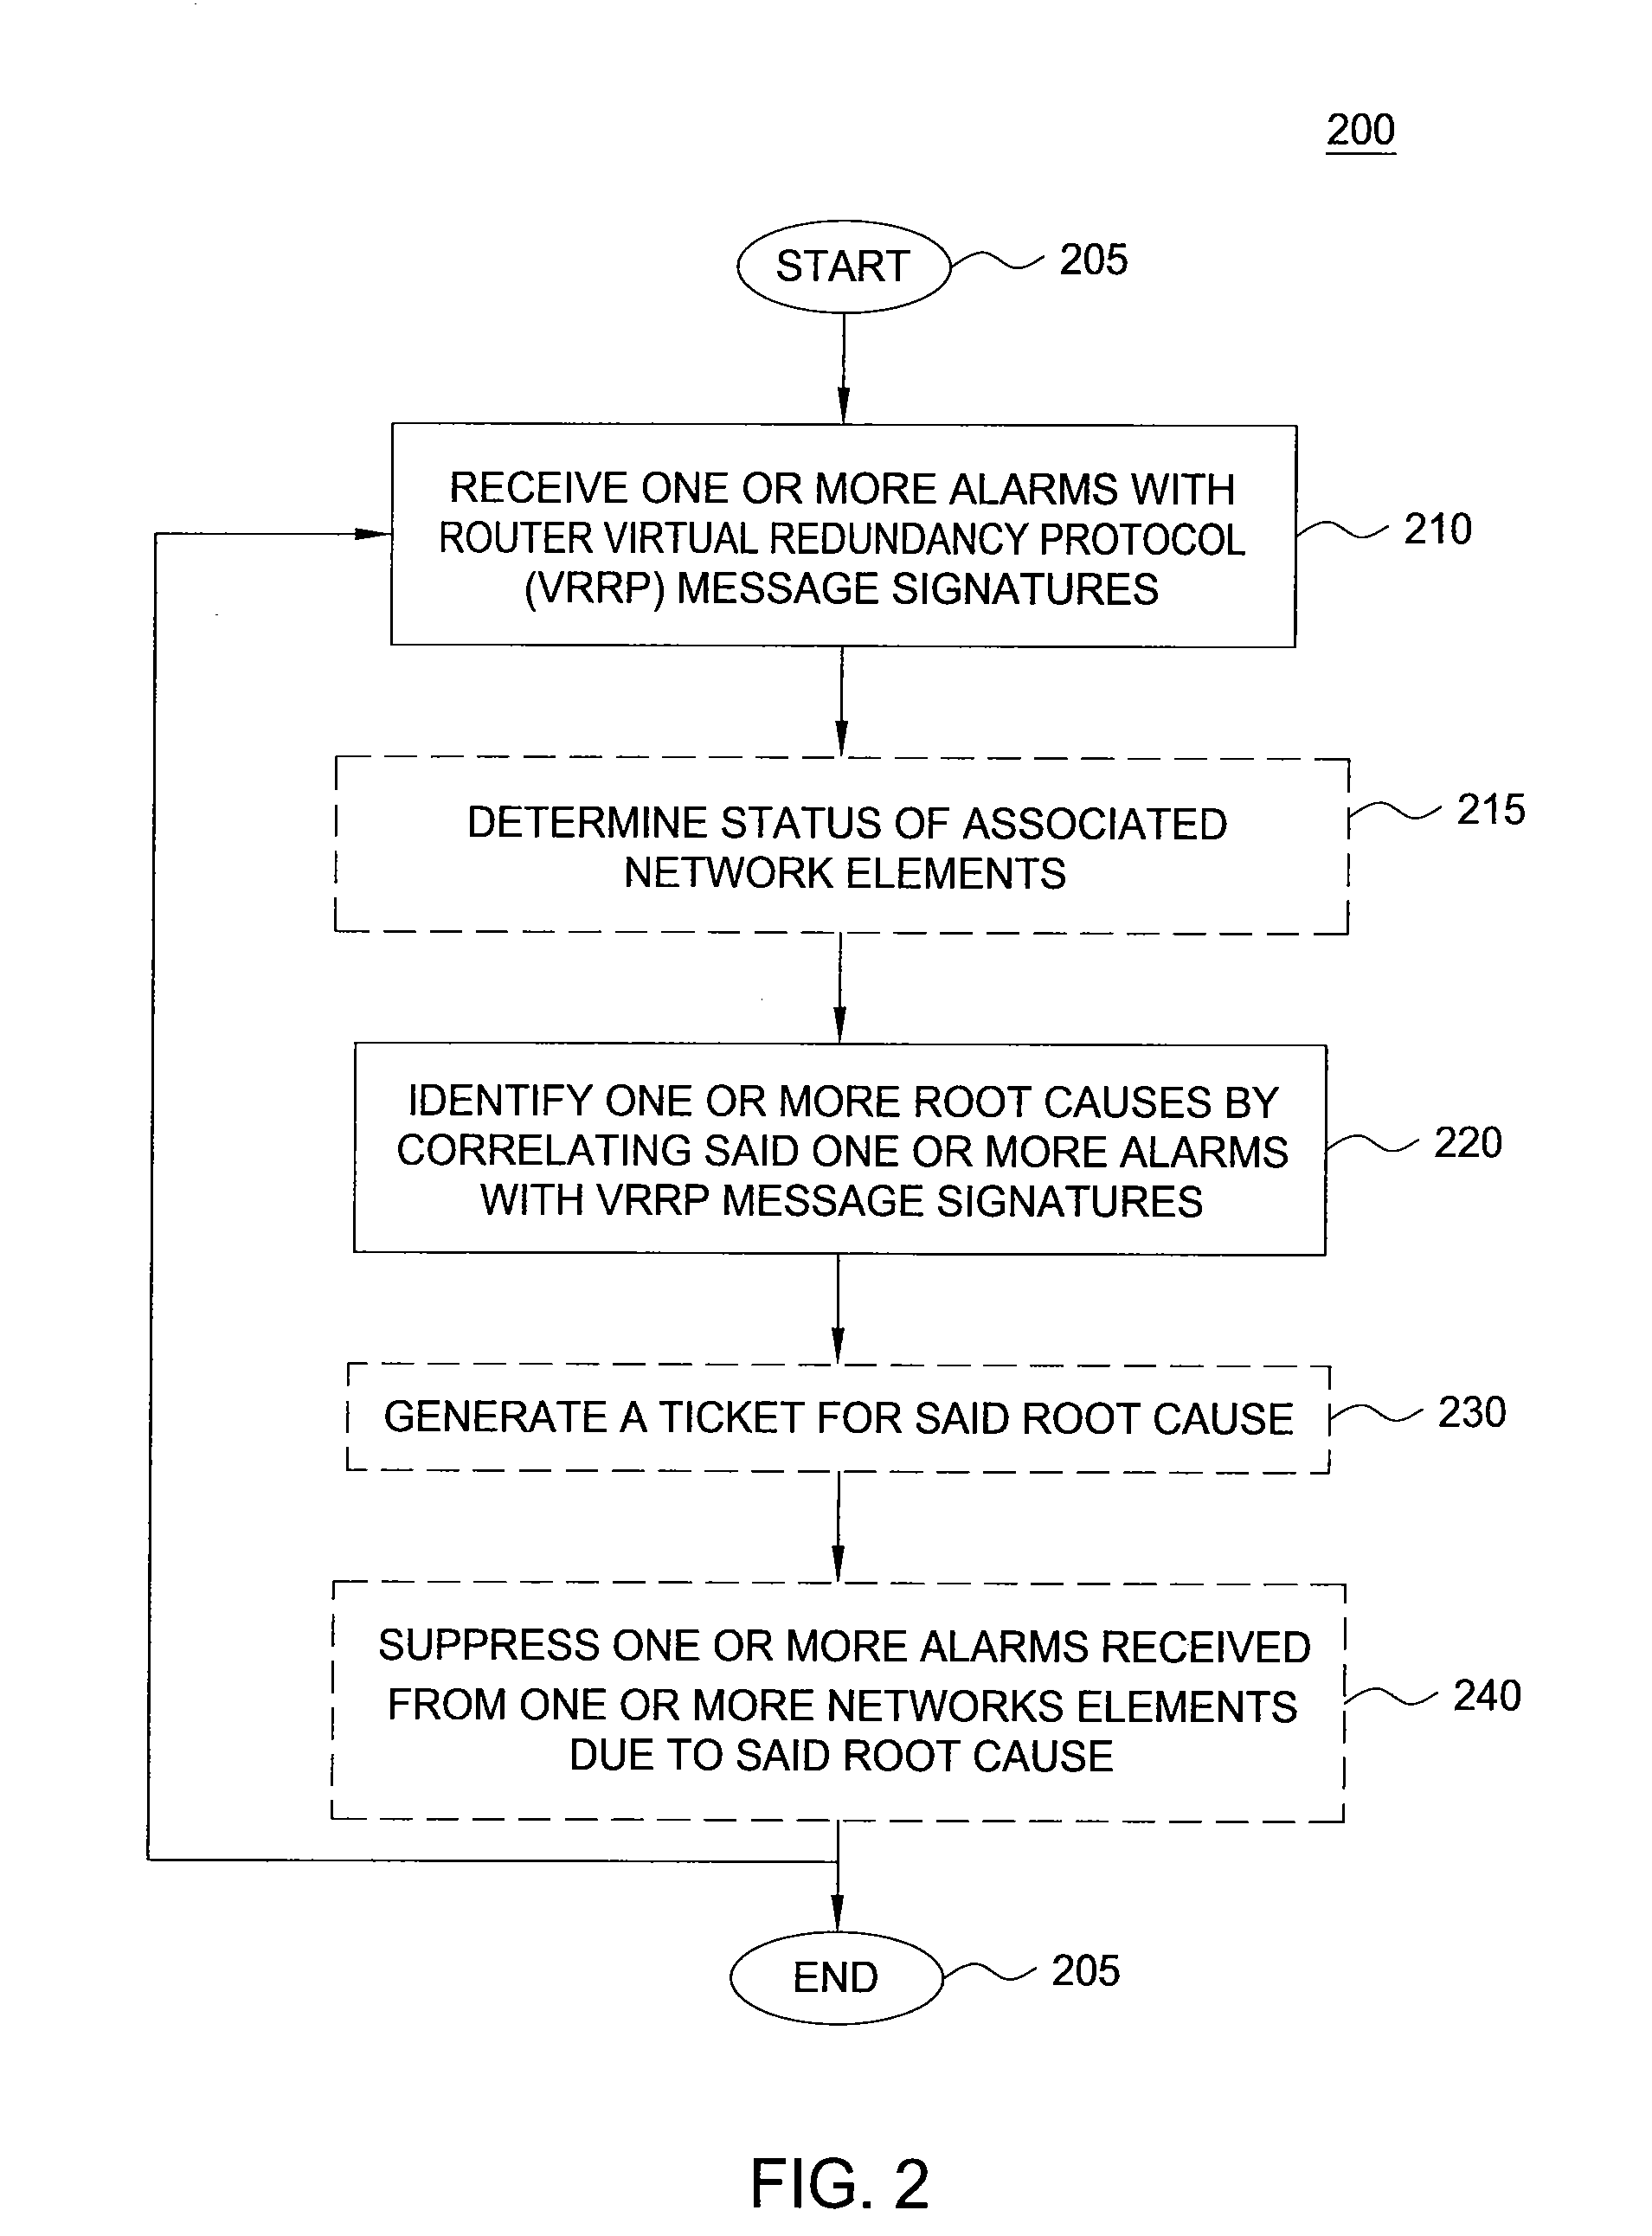 Method and apparatus for providing alarm correlation for a gateway router